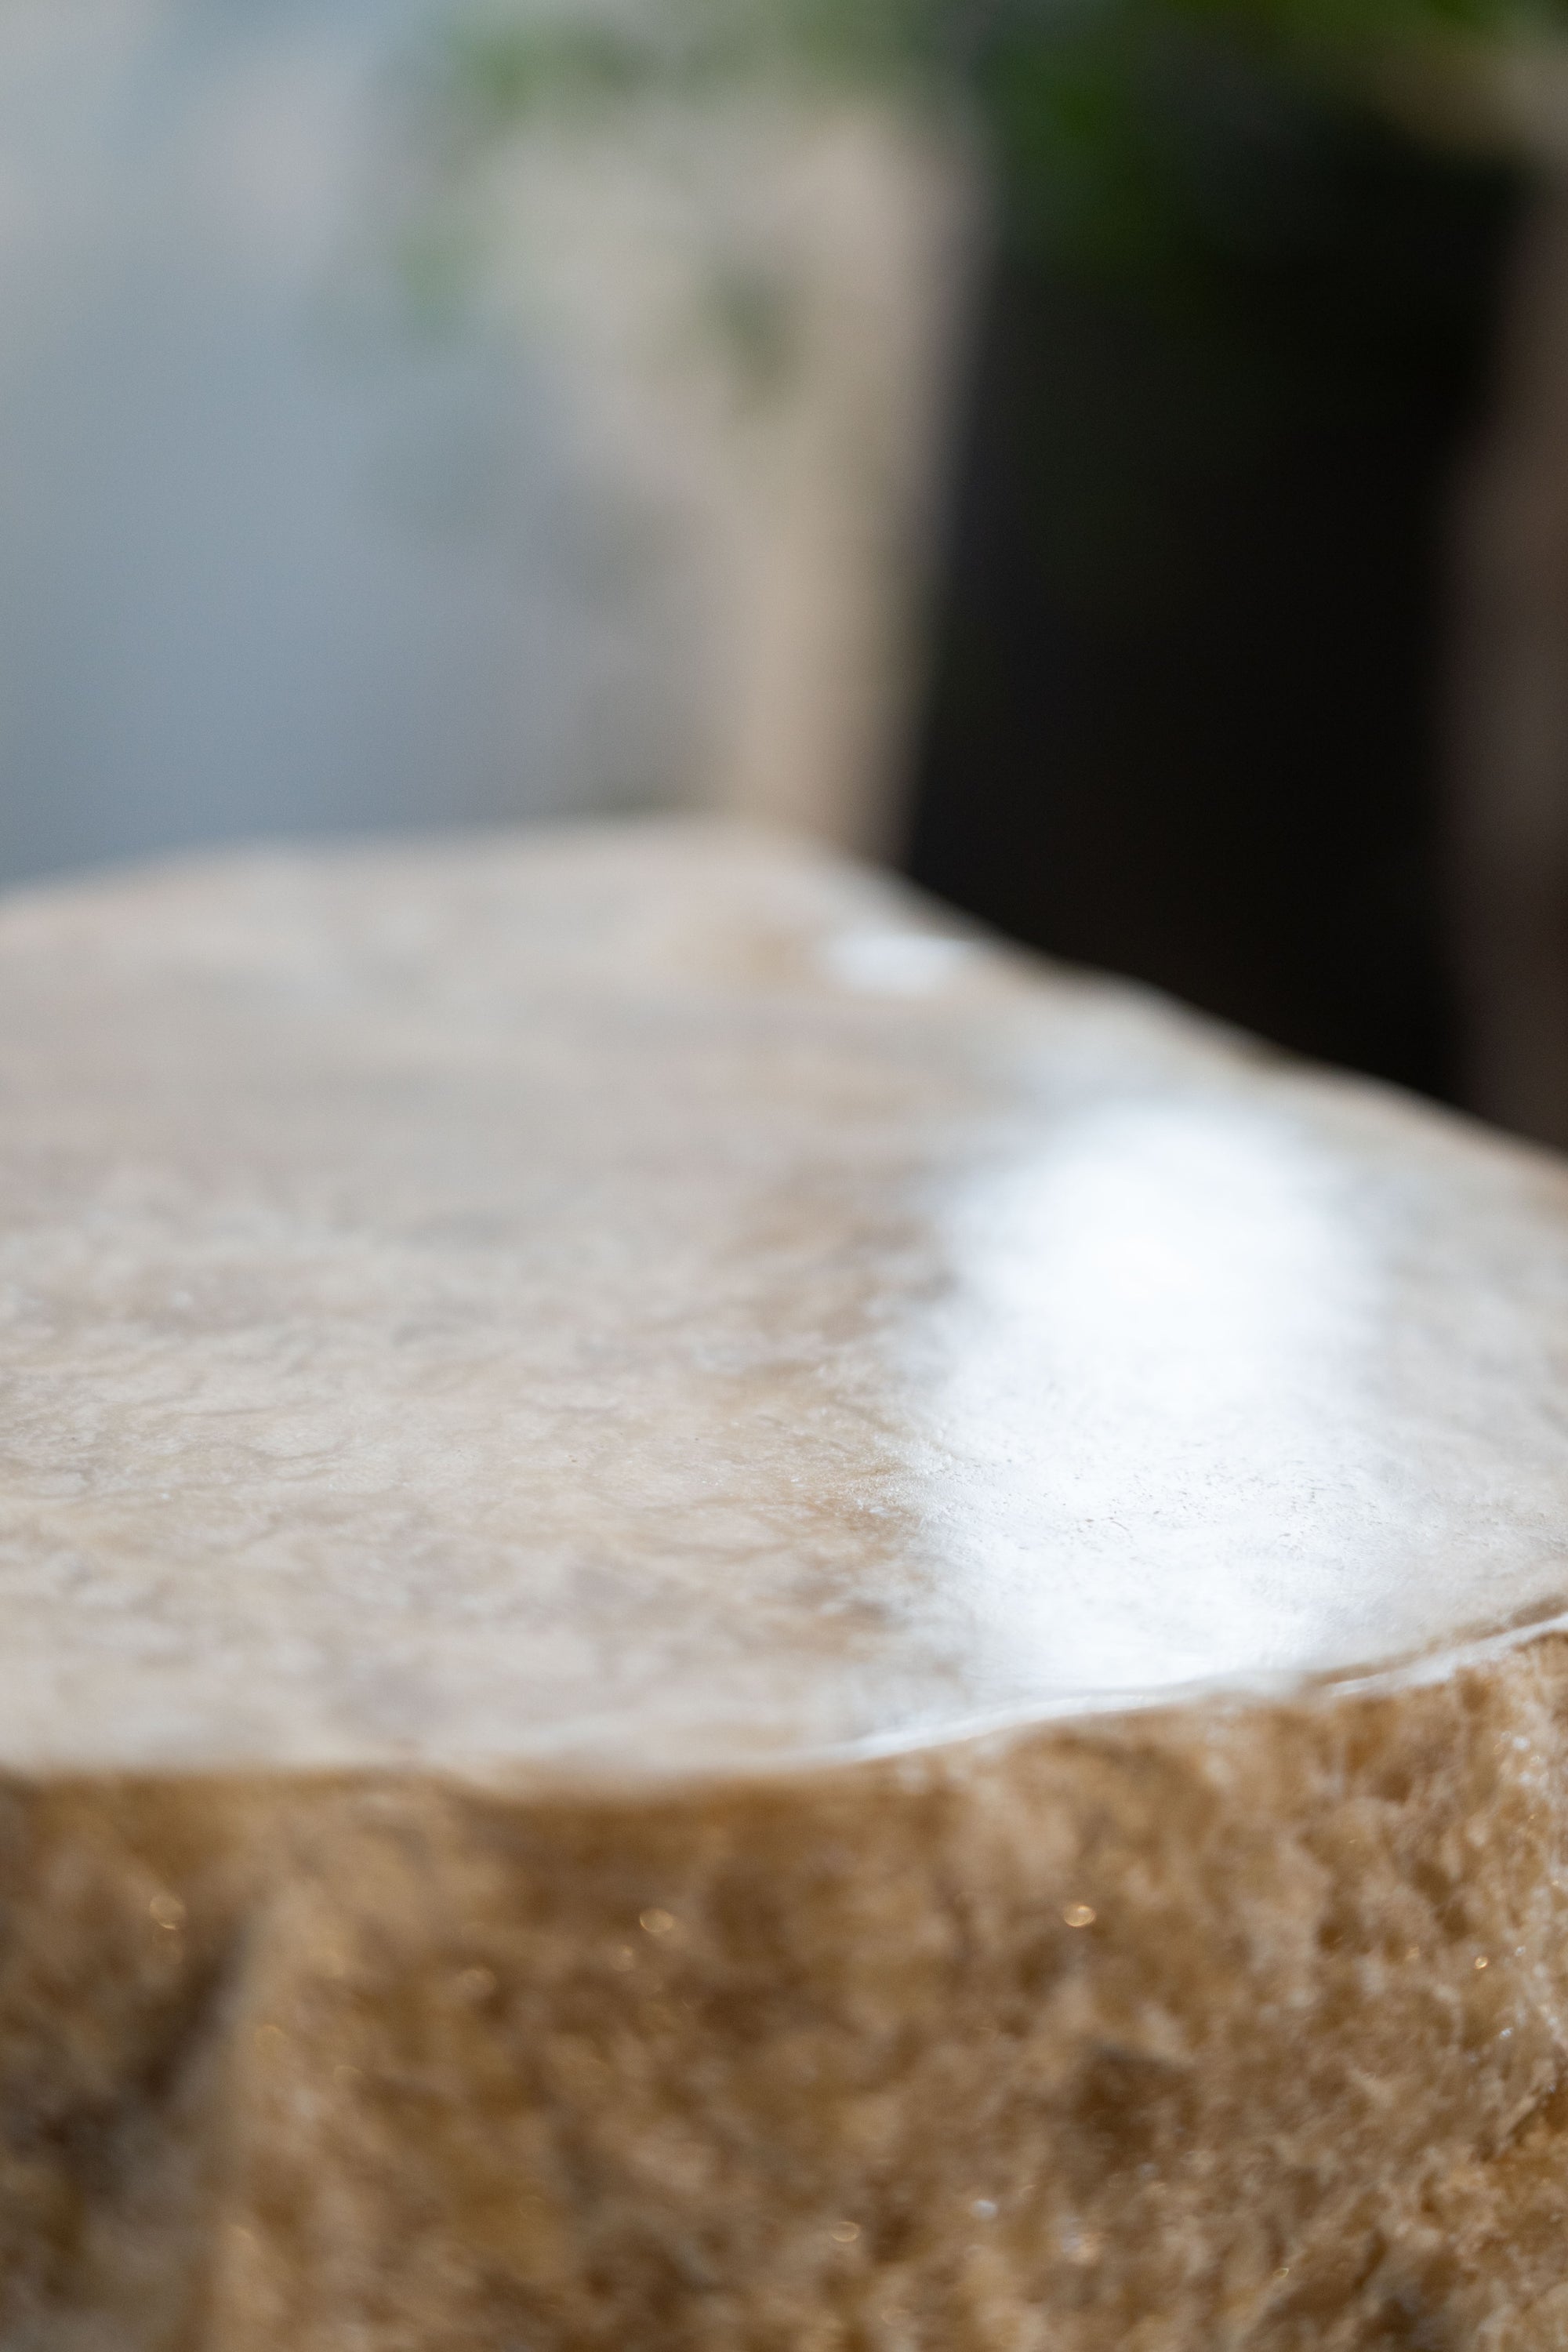 Natural Cut Onyx Side Table \ Stool